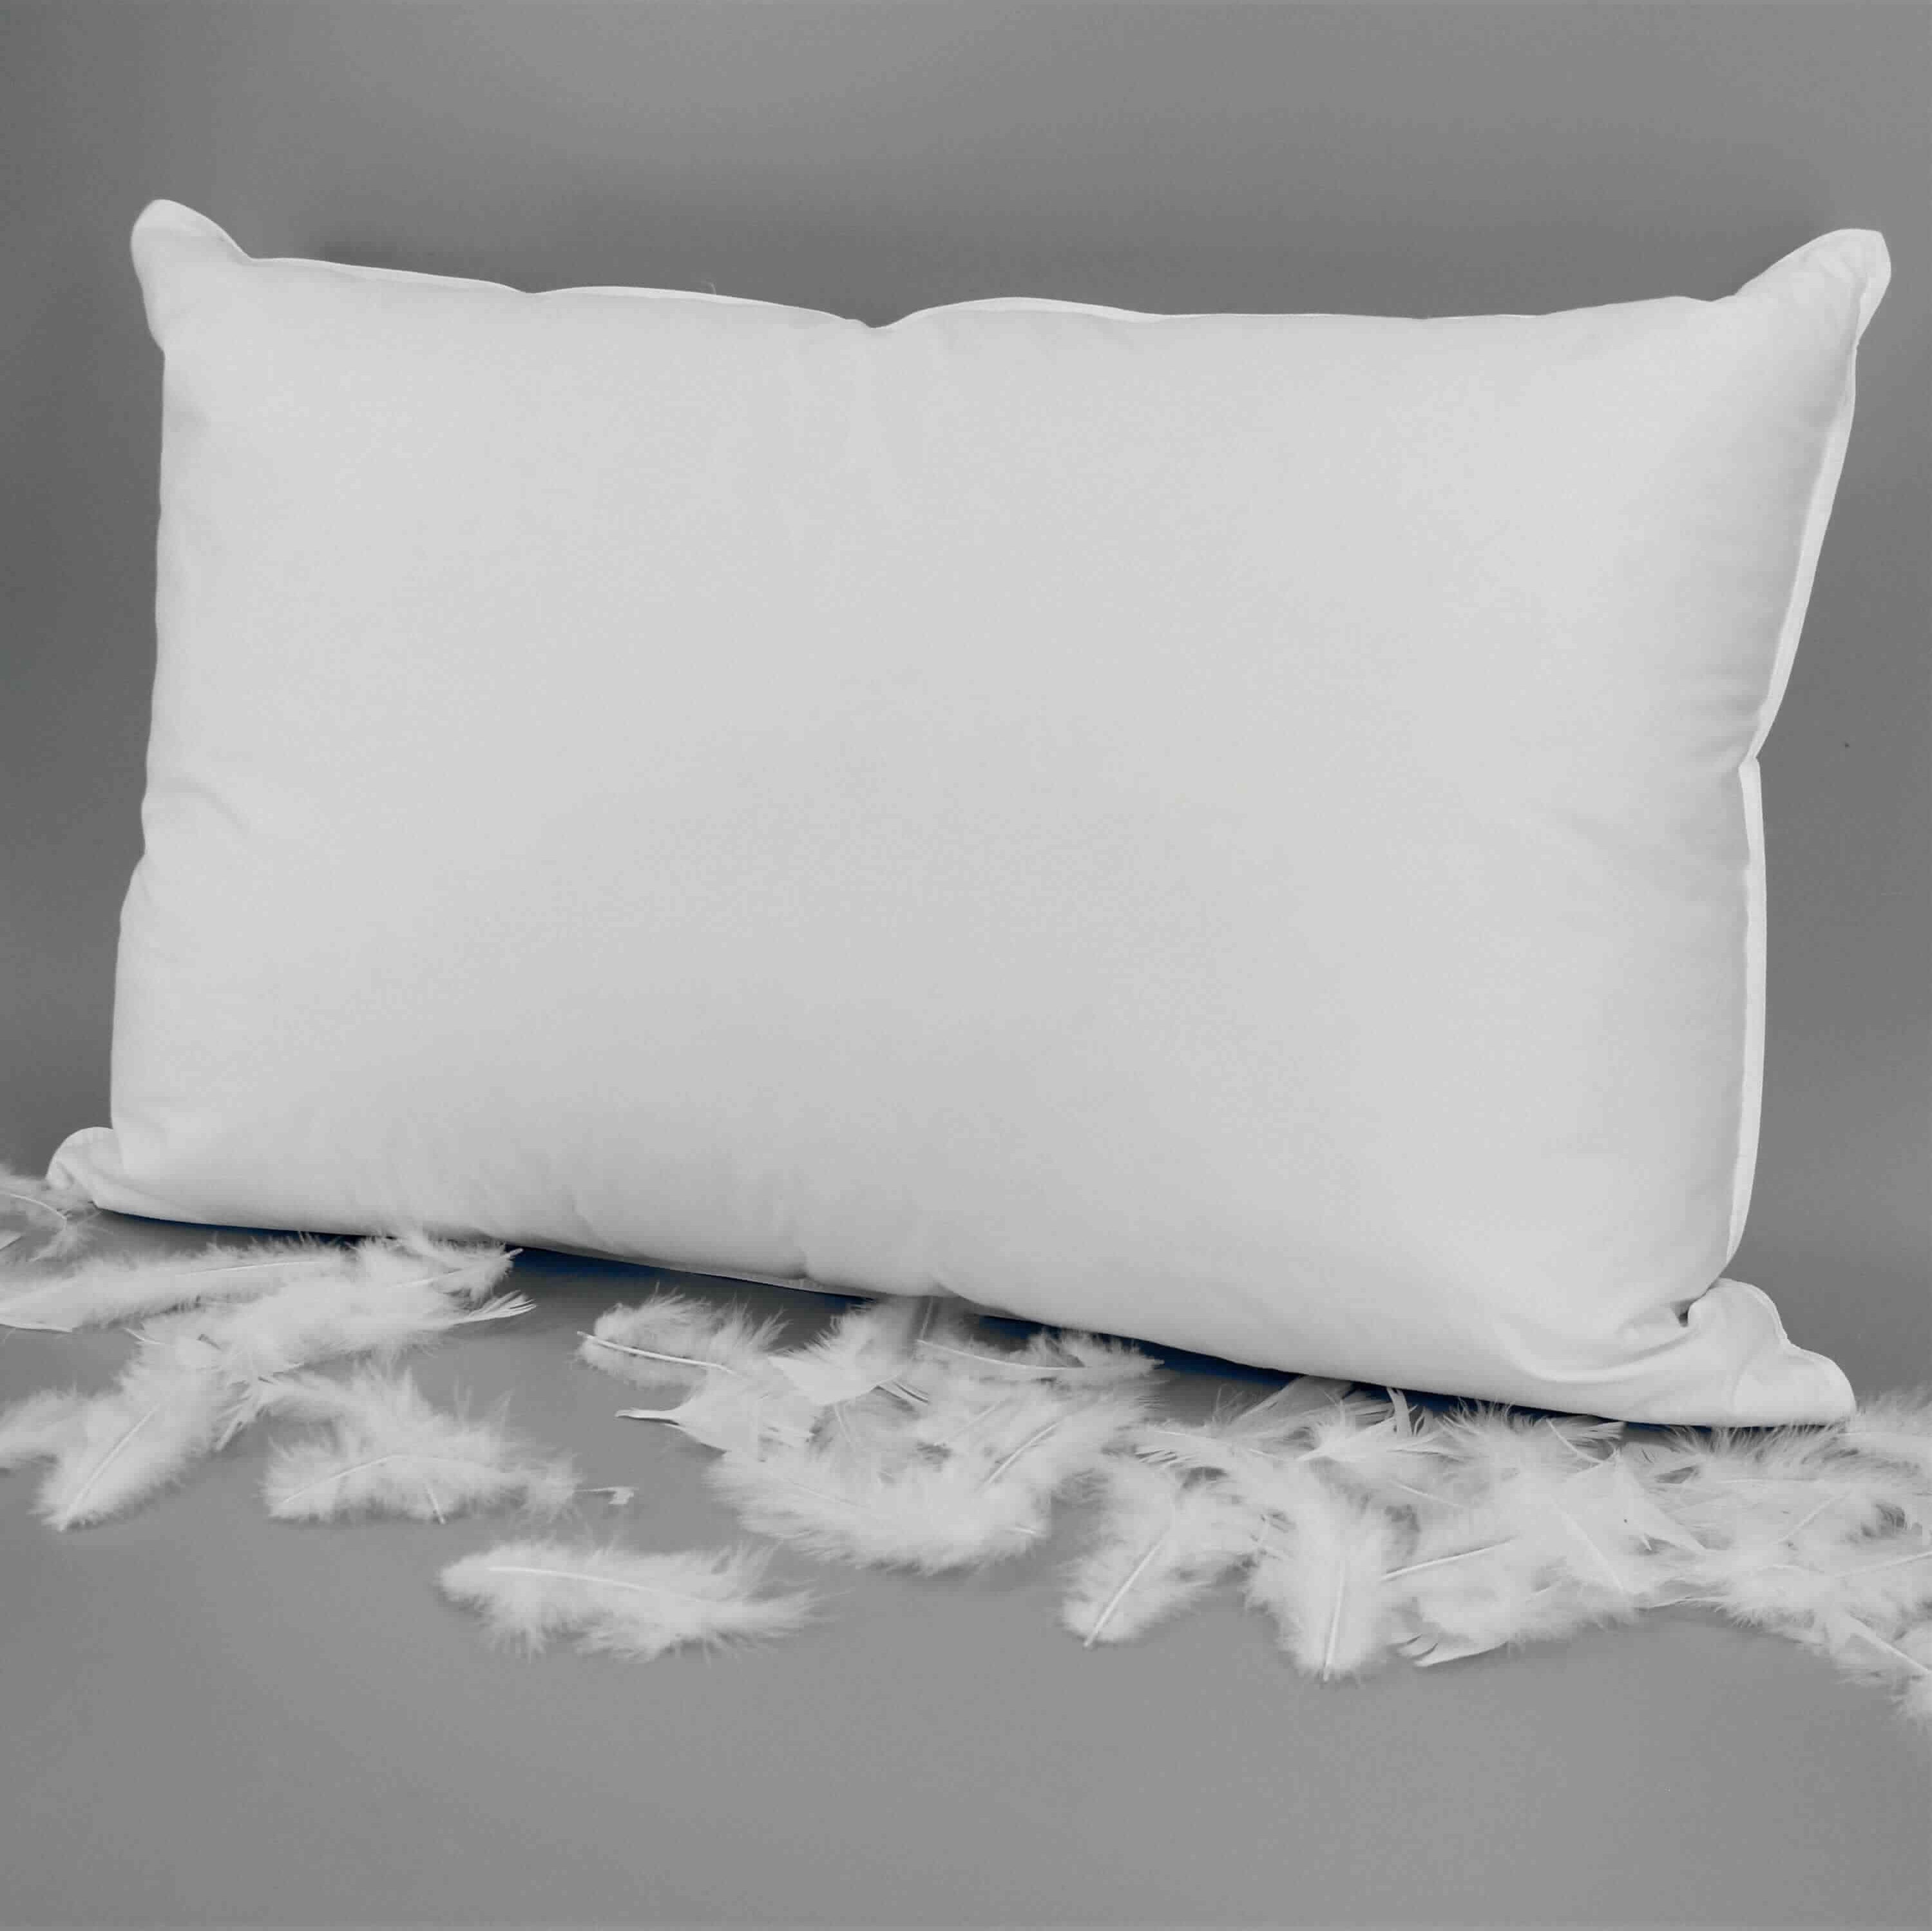 Frontal view of Canadian Hutterite Down Pillow shown with feathers